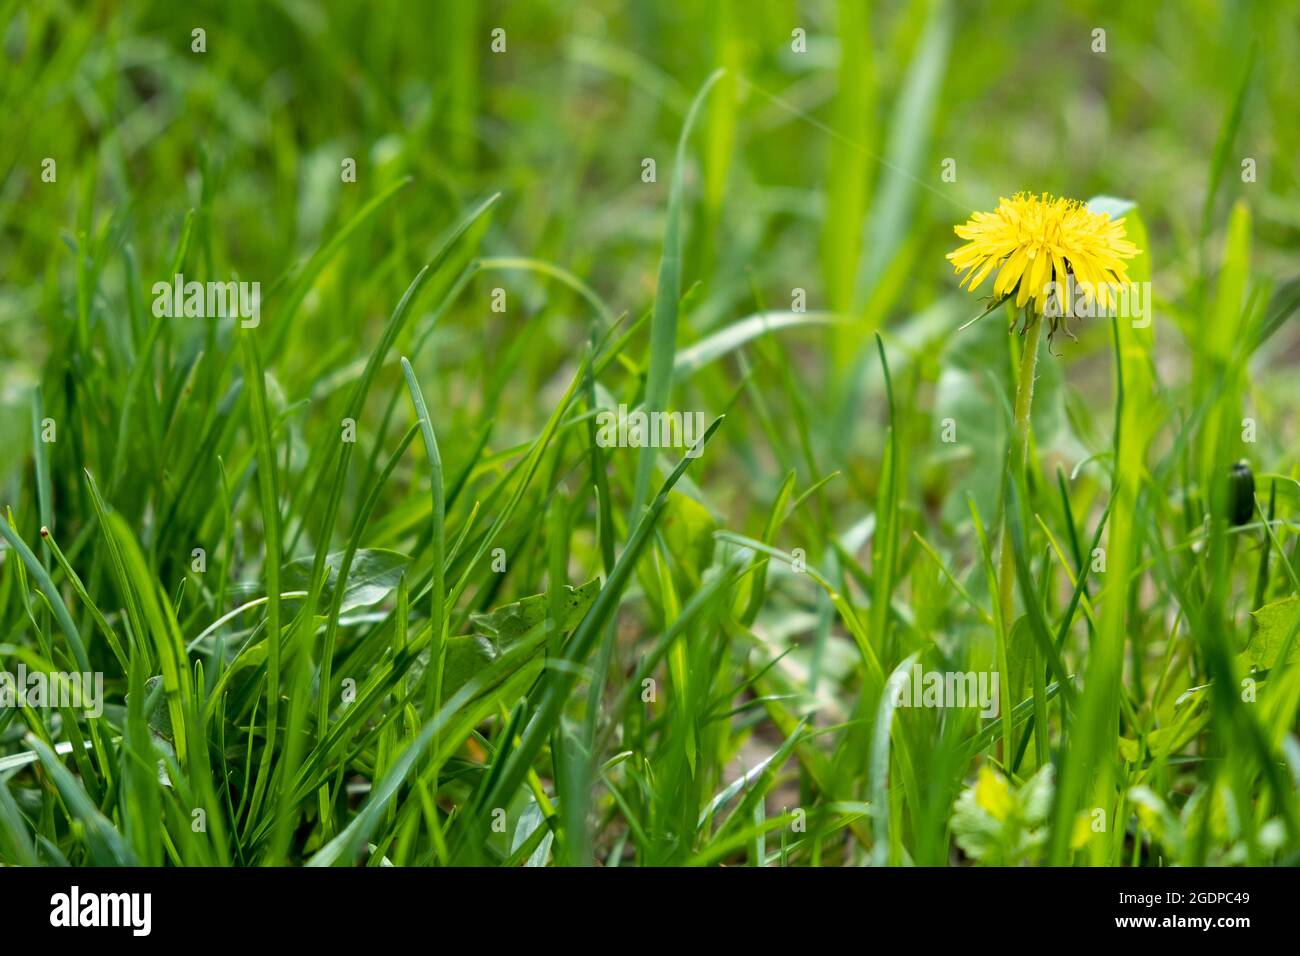 One blooming dandelion in grass, green field and yellow dandelion, selective focus Stock Photo